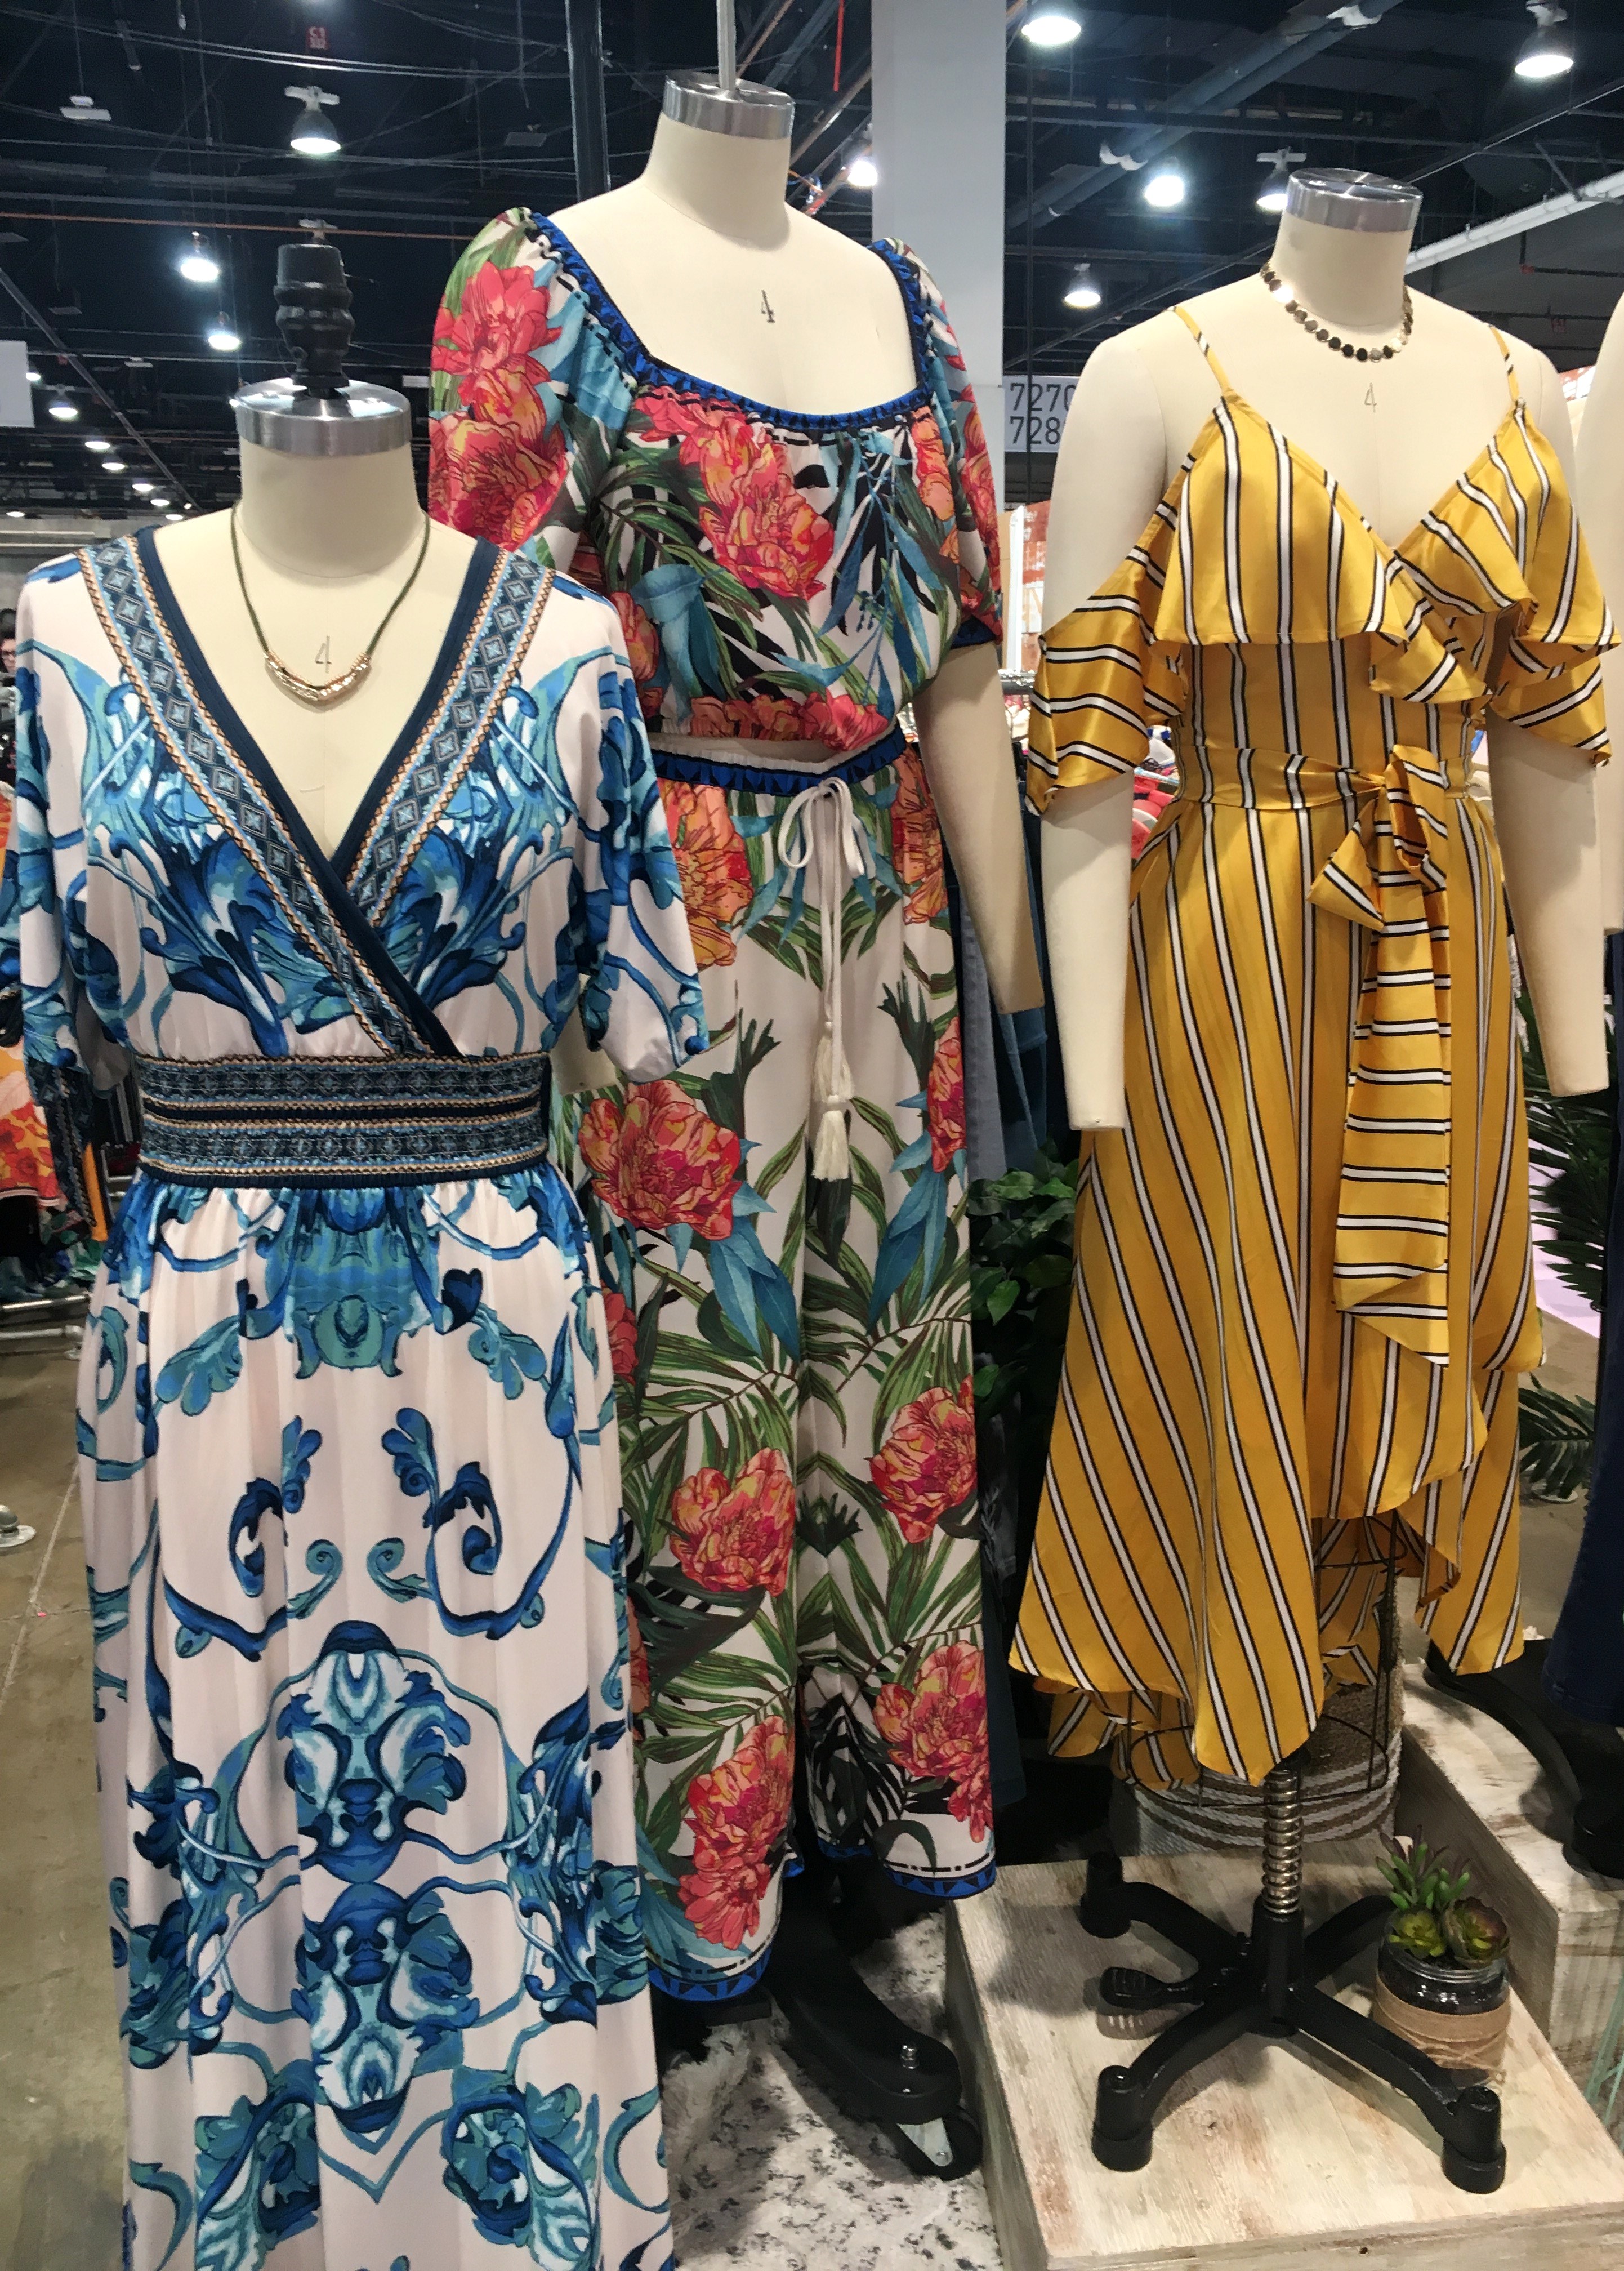 Buyers' Report: Spring Fashion Trends for 2018 - Crossroads